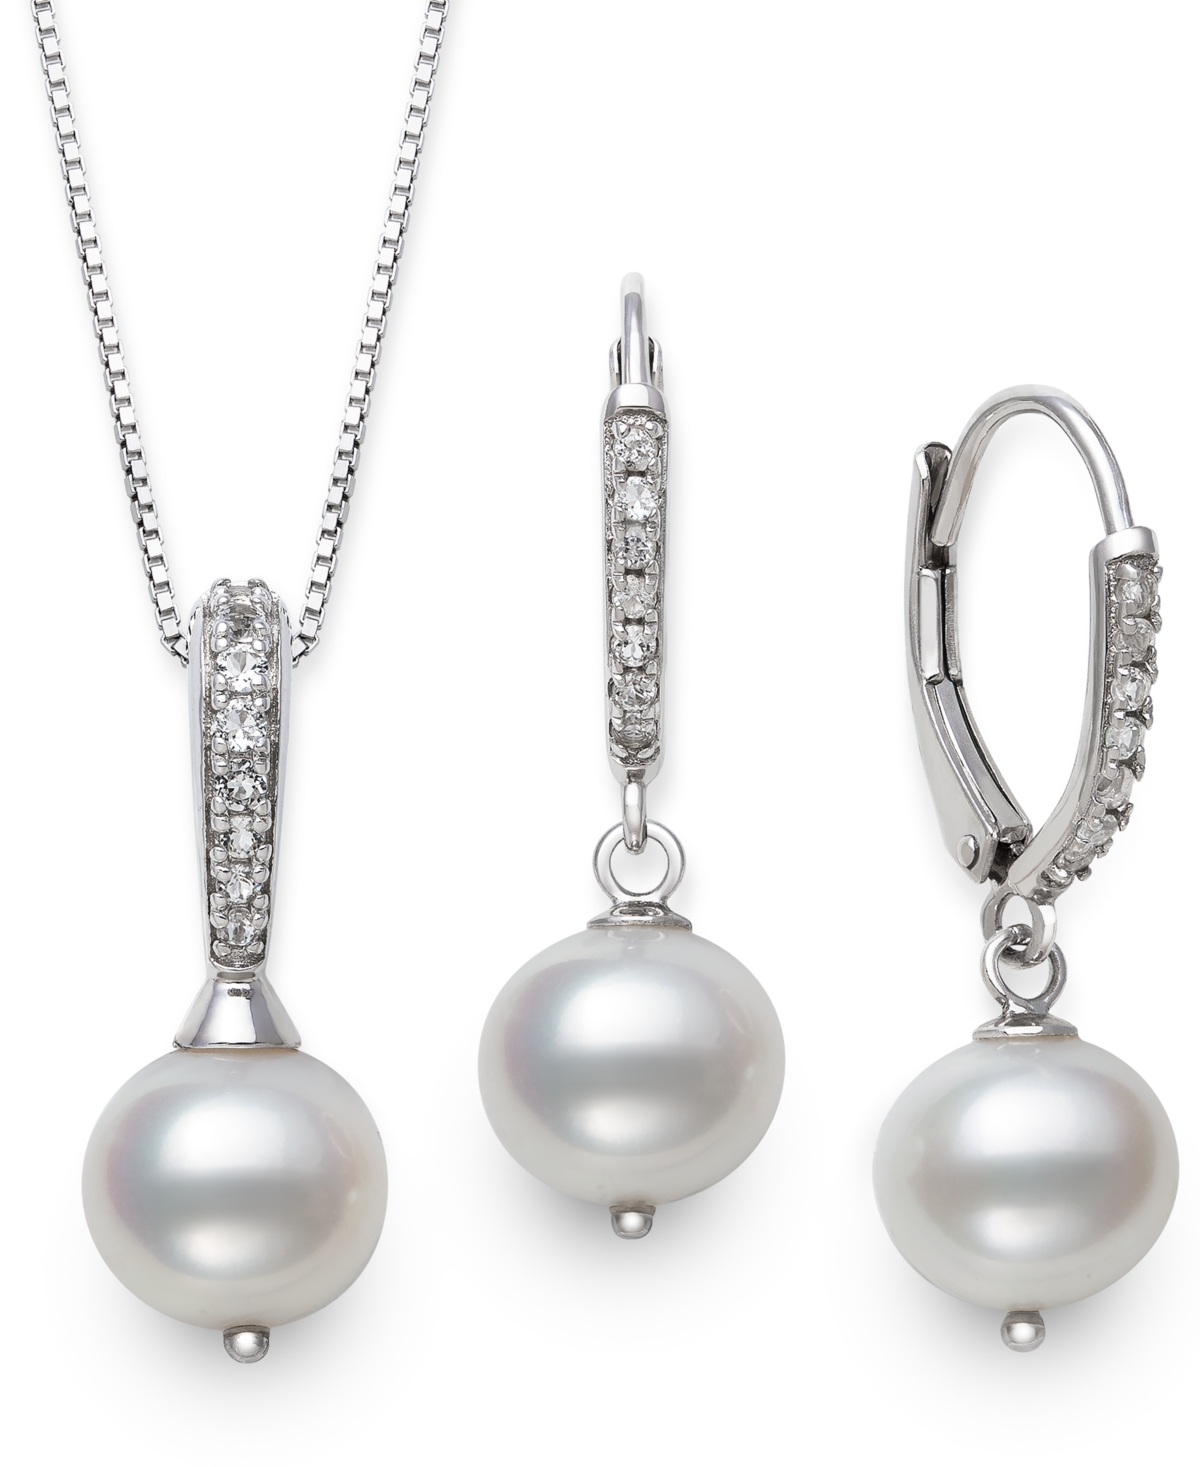 2-Pc. Set Cultured Freshwater Pearl (7-1/2mm) & Cubic Zirconia Pendant Necklace & Matching Drop Earrings in Sterling Silver - Sterling Si